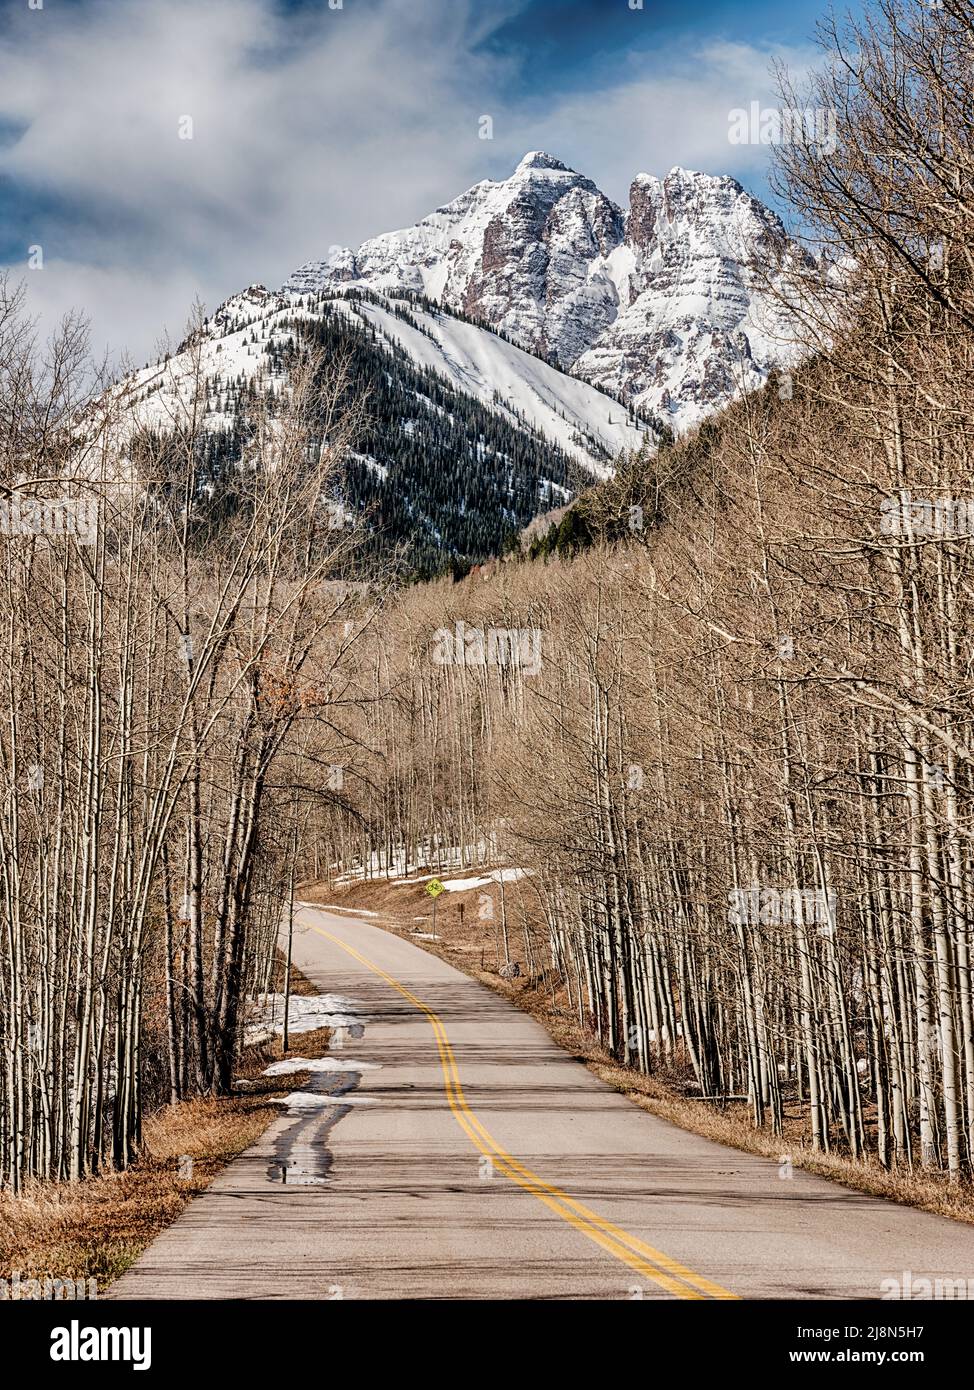 A road winds through groves of aspen trees on the way to the Maroon Bells in Colorado. Stock Photo